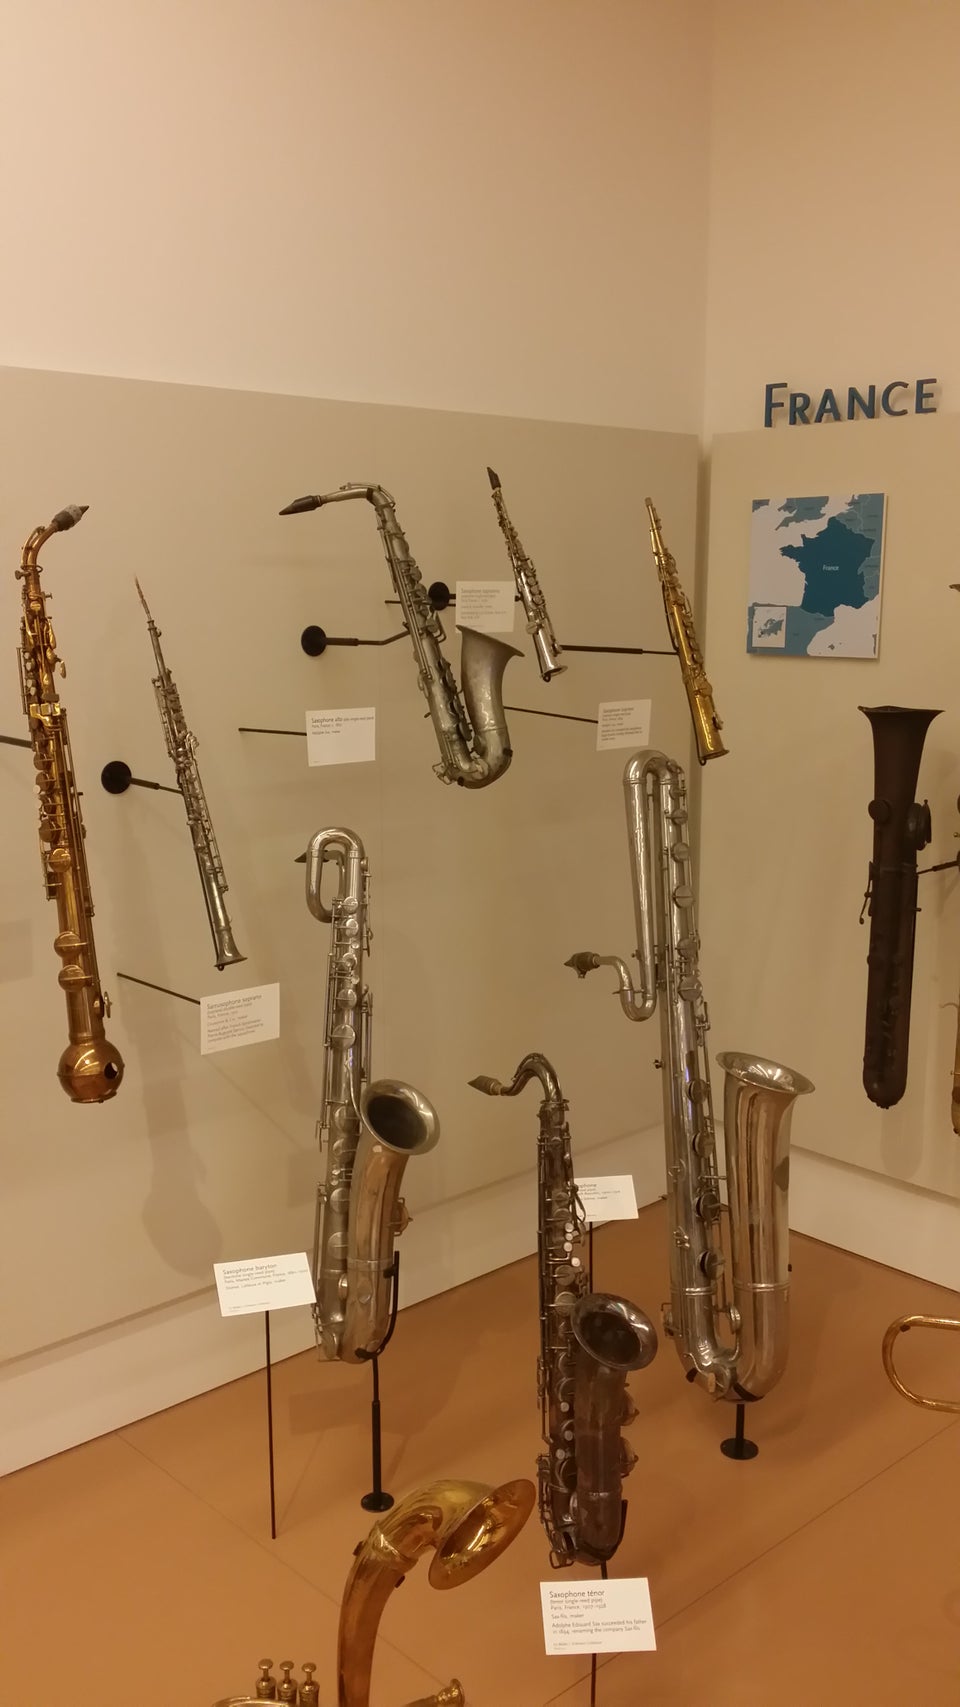 Photo of Musical Instrument Museum